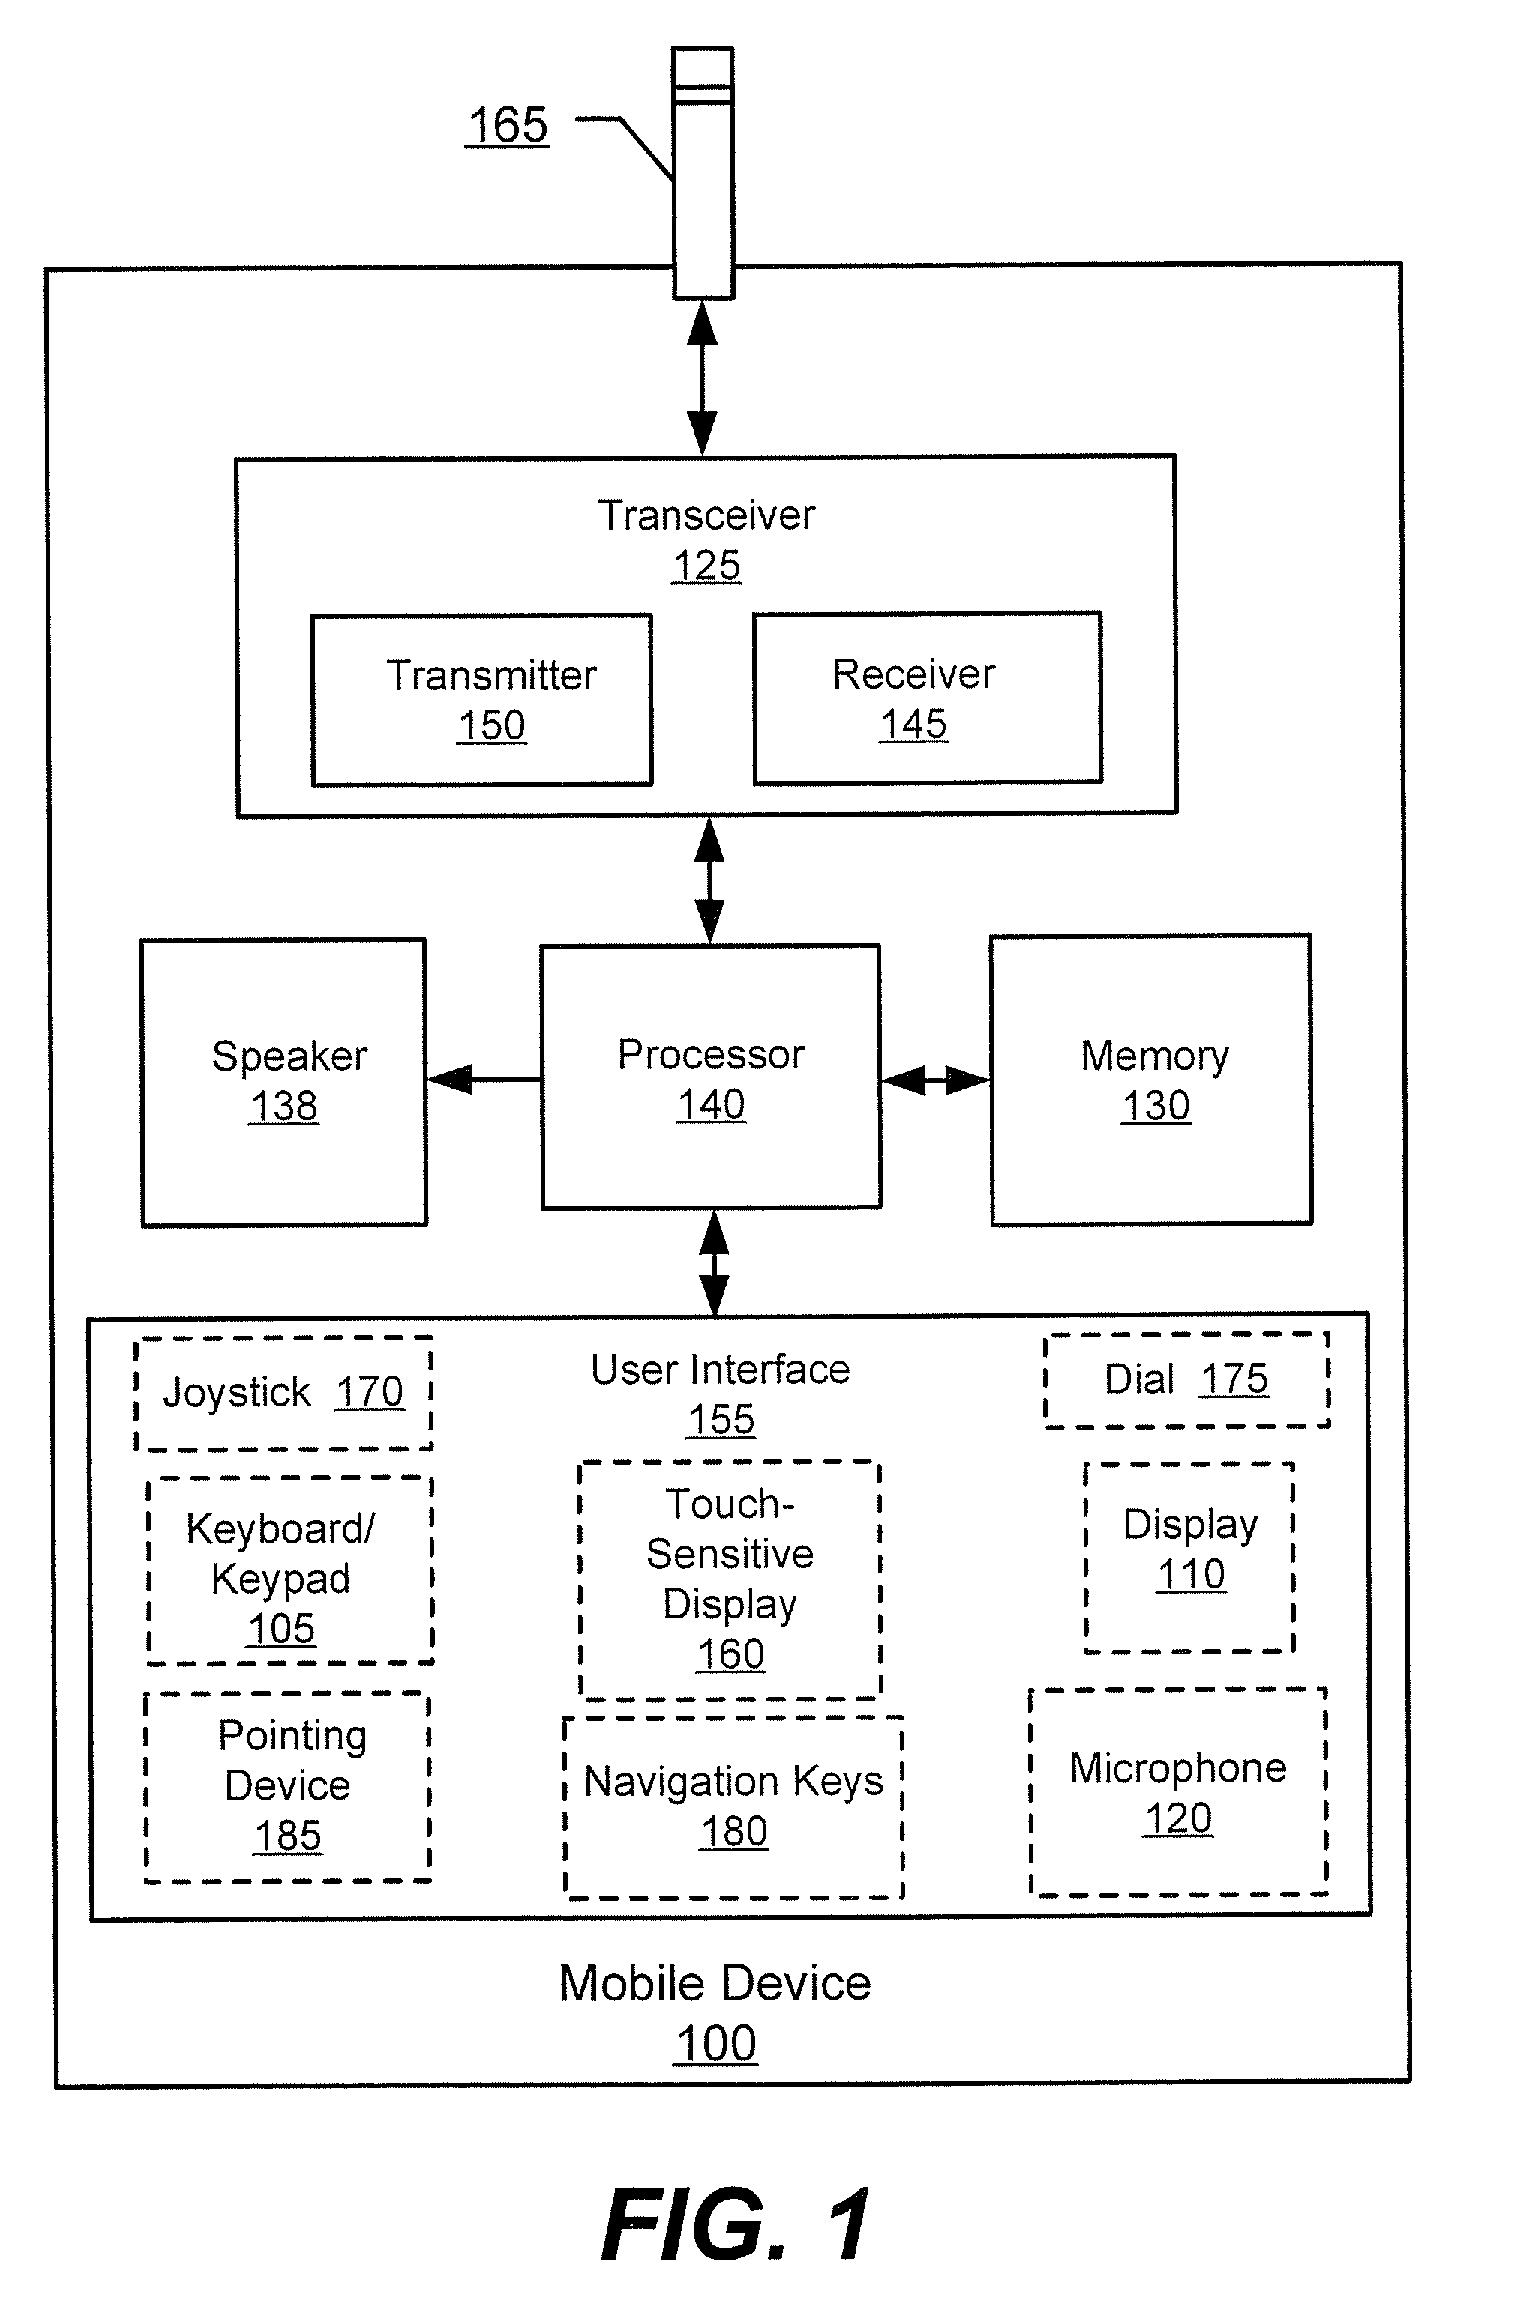 Methods, devices, and computer program products for predictive text entry in mobile terminals using multiple databases